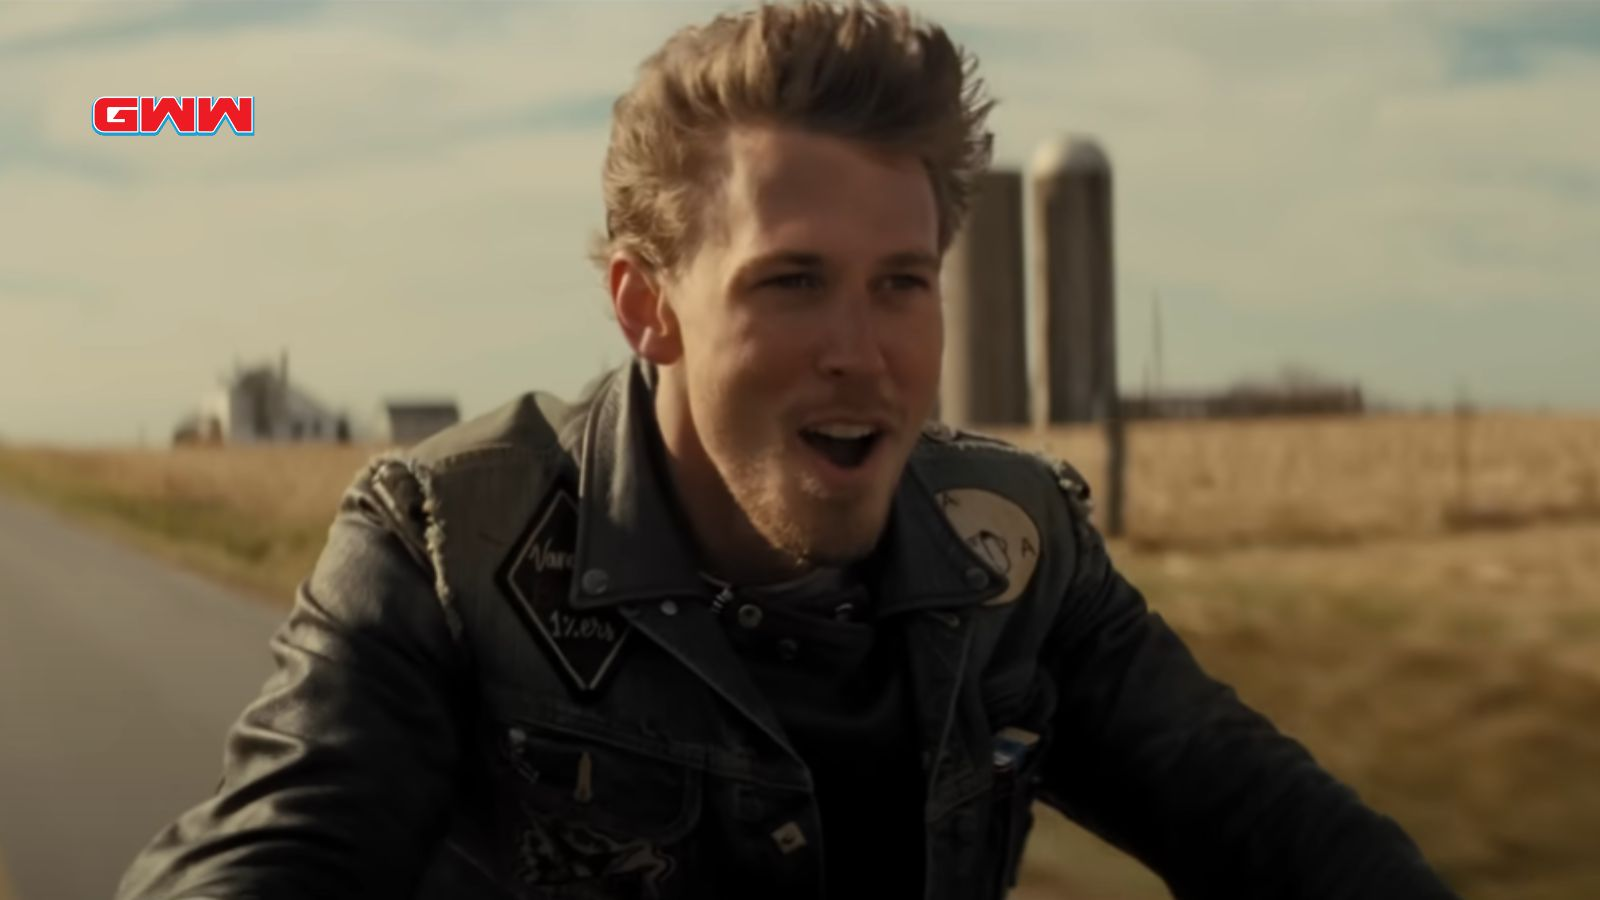 Benny riding a motorcycle, looking excited, farm buildings in background.